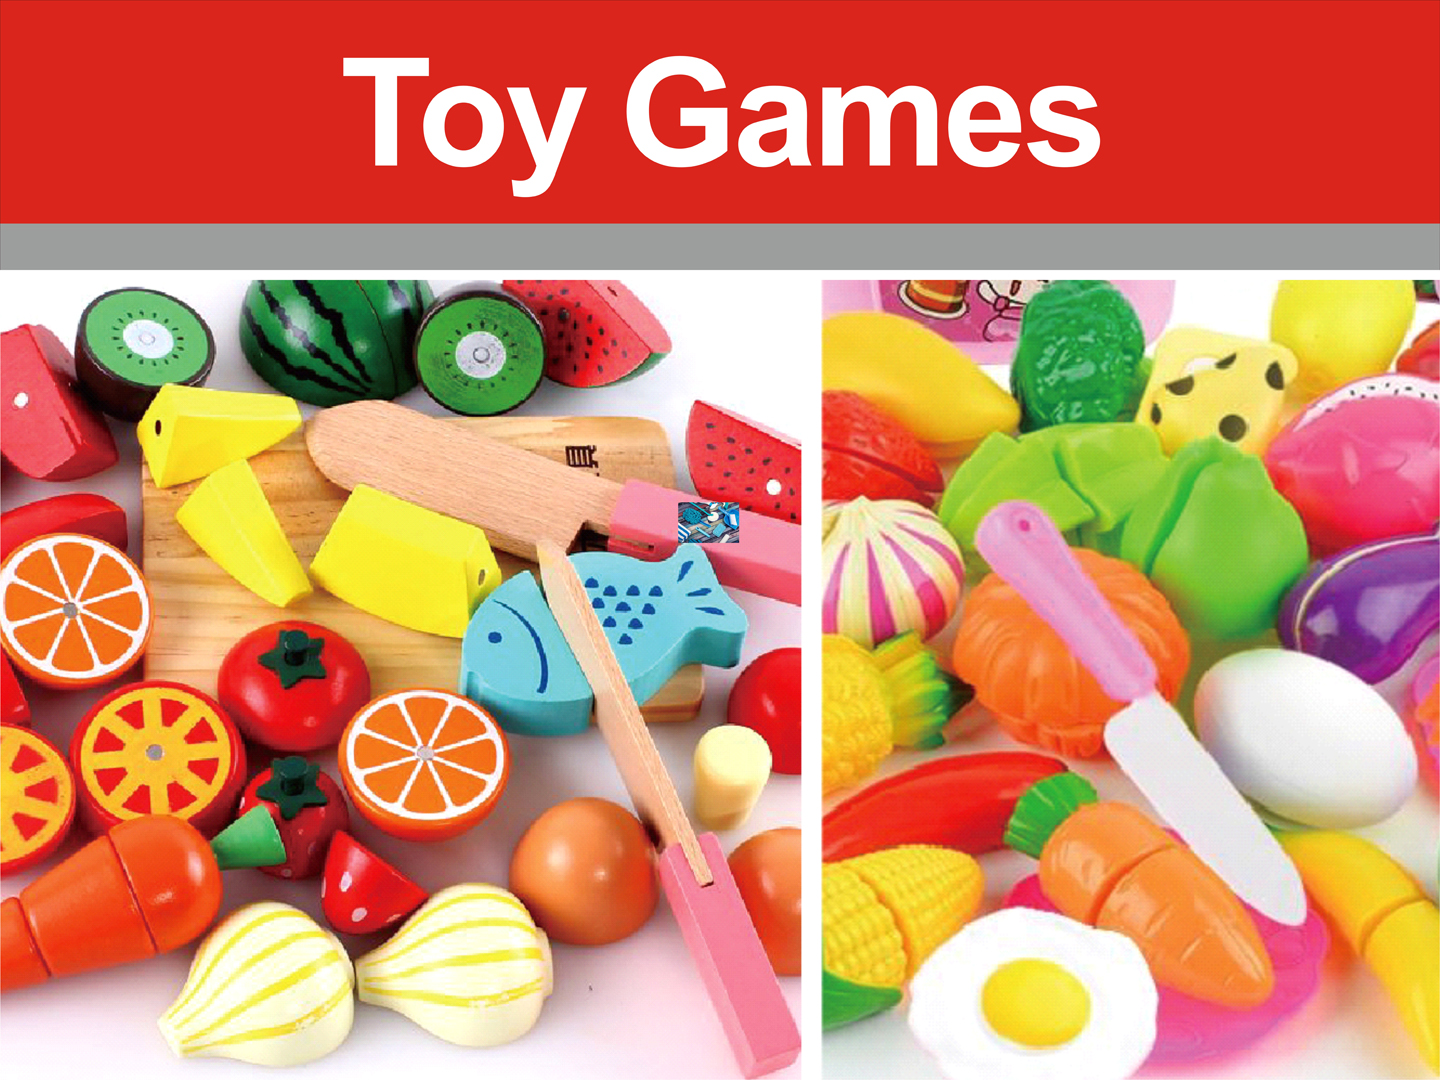 Toy Games